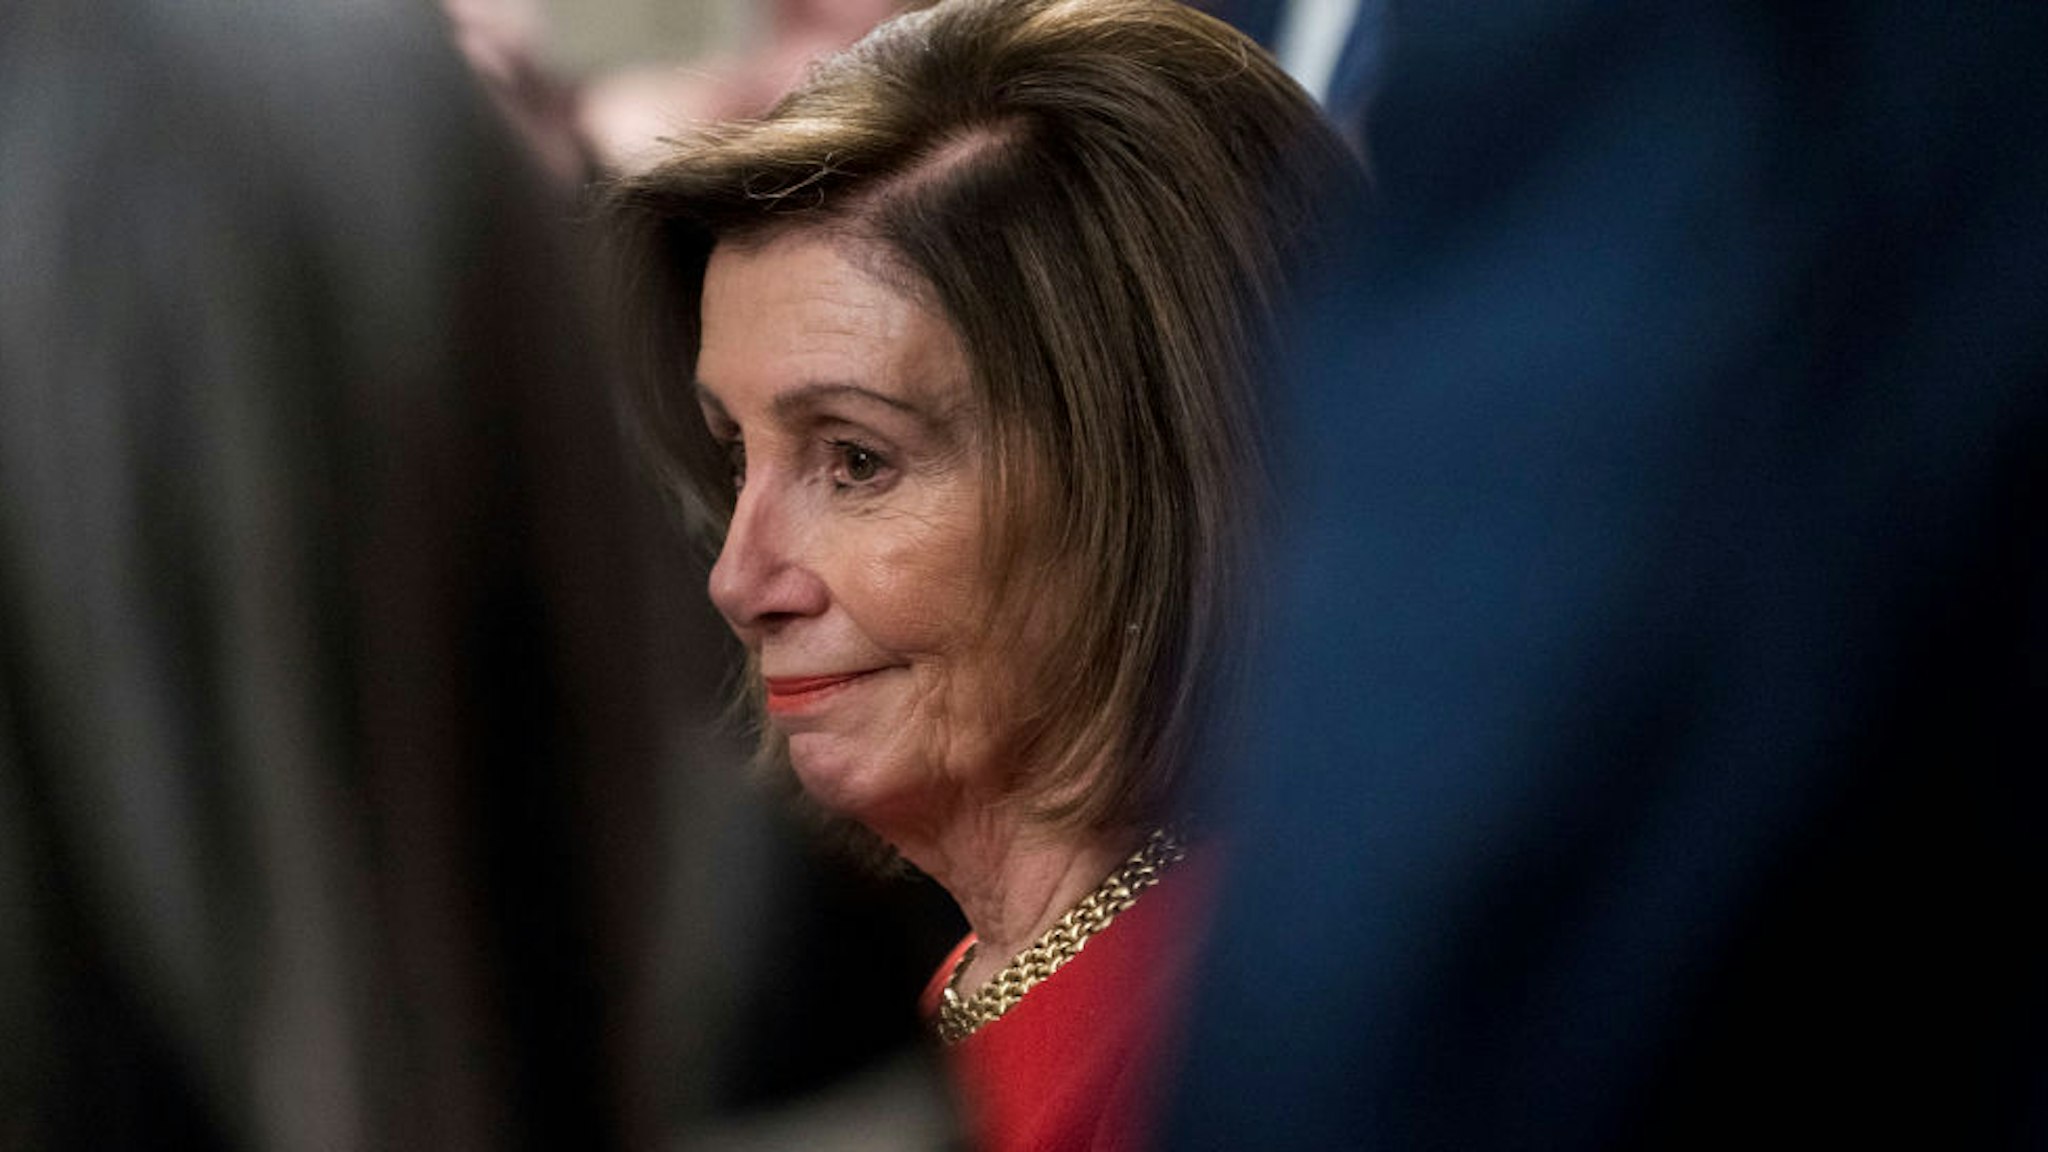 House Speaker Nancy Pelosi, (D-CA) listens during a press conference with House Democrats held to highlight the legislative accomplishments of the year on December 19, 2019 in Washington, DC. (Photo by Sarah Silbiger/Getty Images)